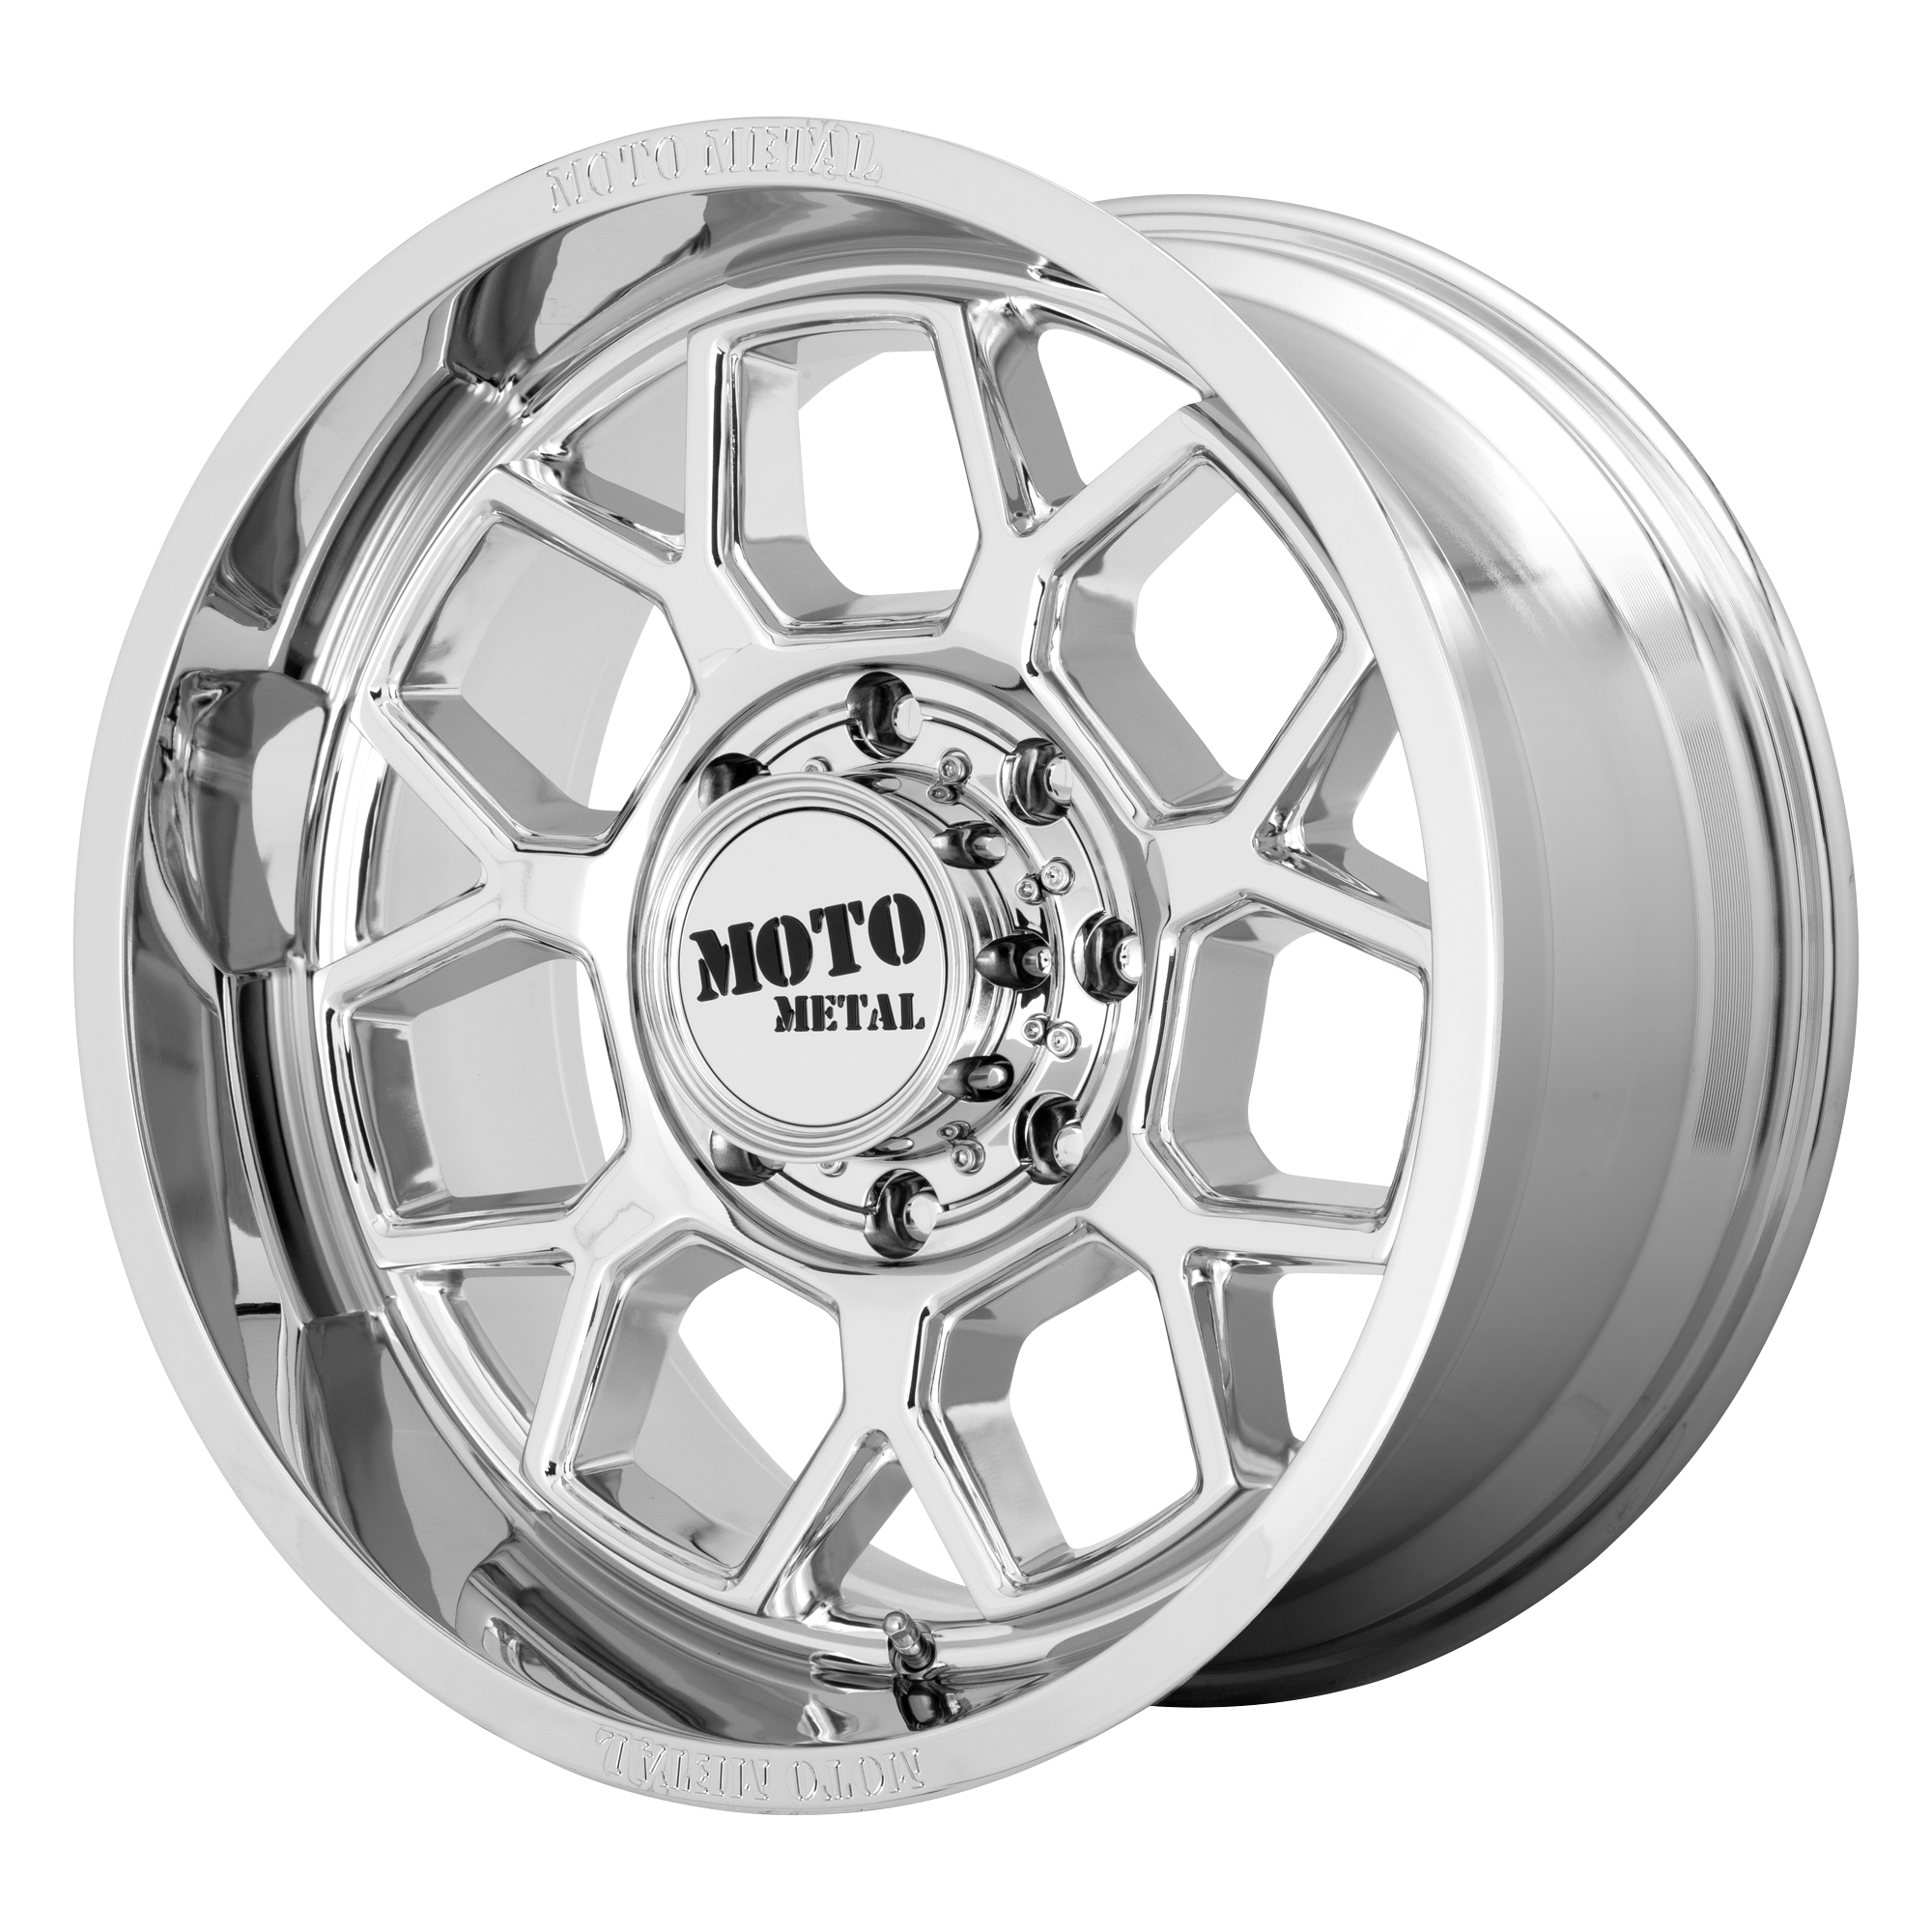 BANSHEE 20x10 6x135.00 CHROME (-18 mm) - Tires and Engine Performance